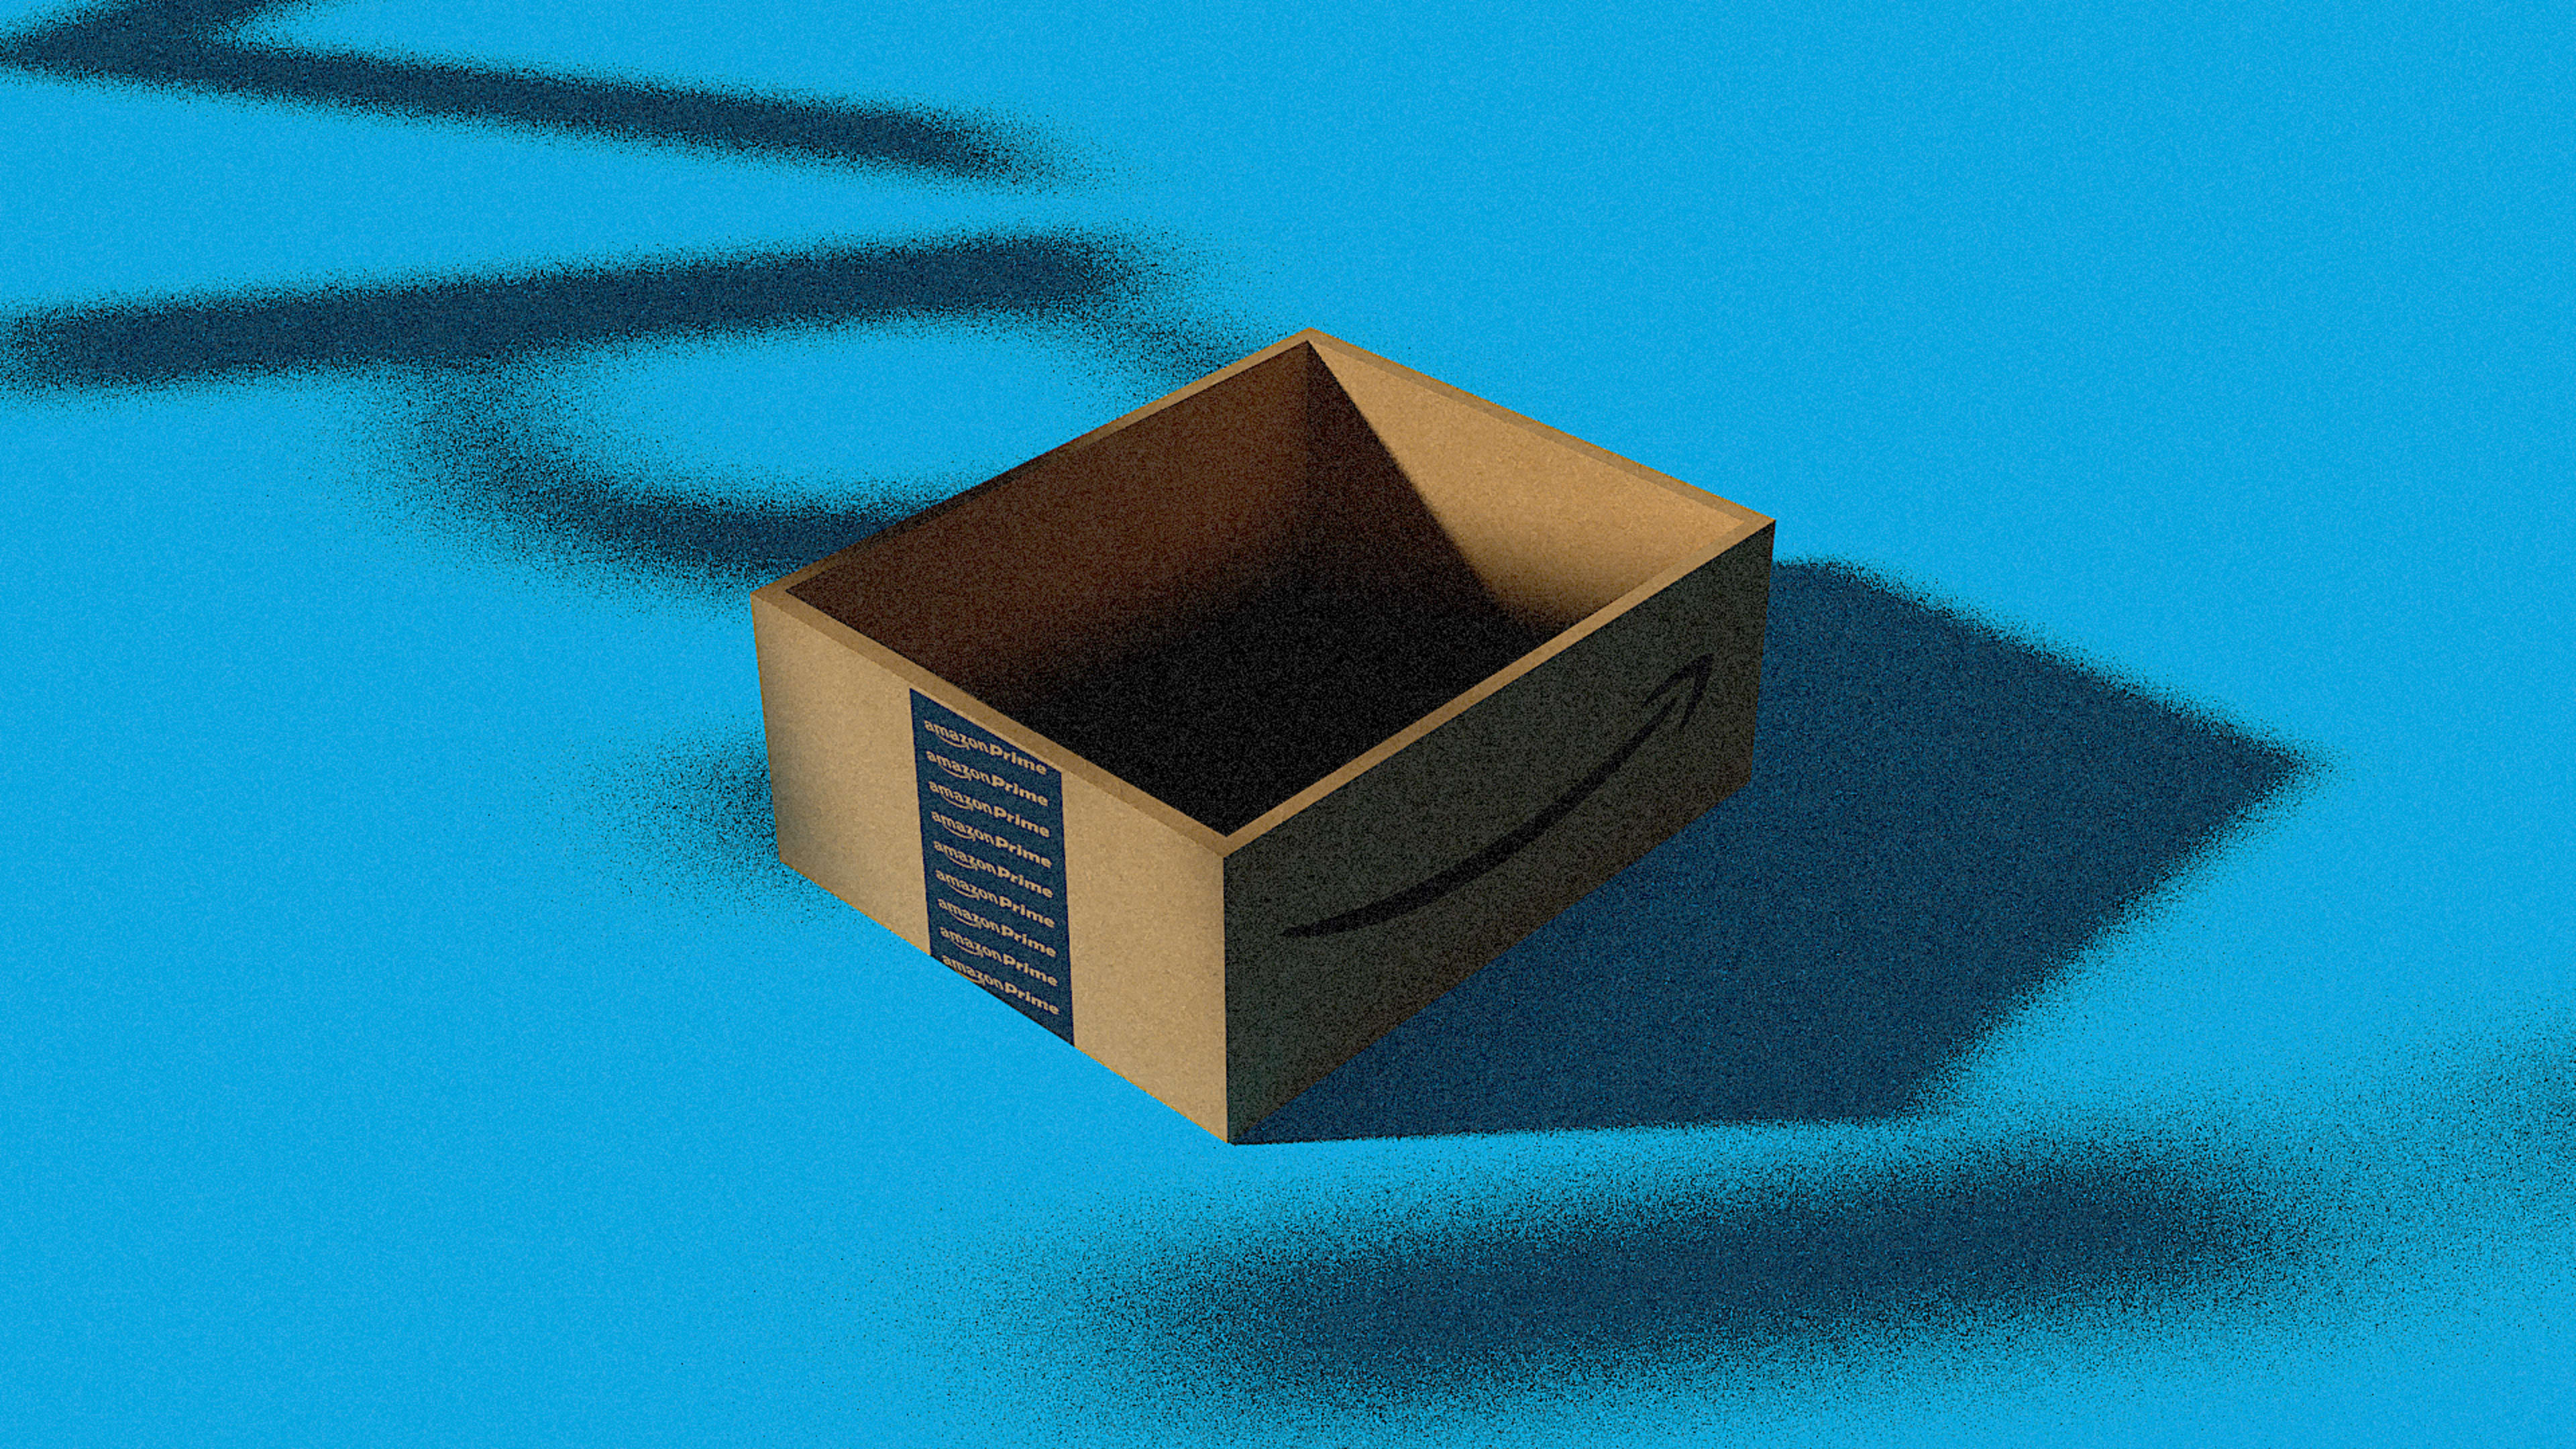 Amazon Prime is getting worse, and it’s making me question the nature of reality